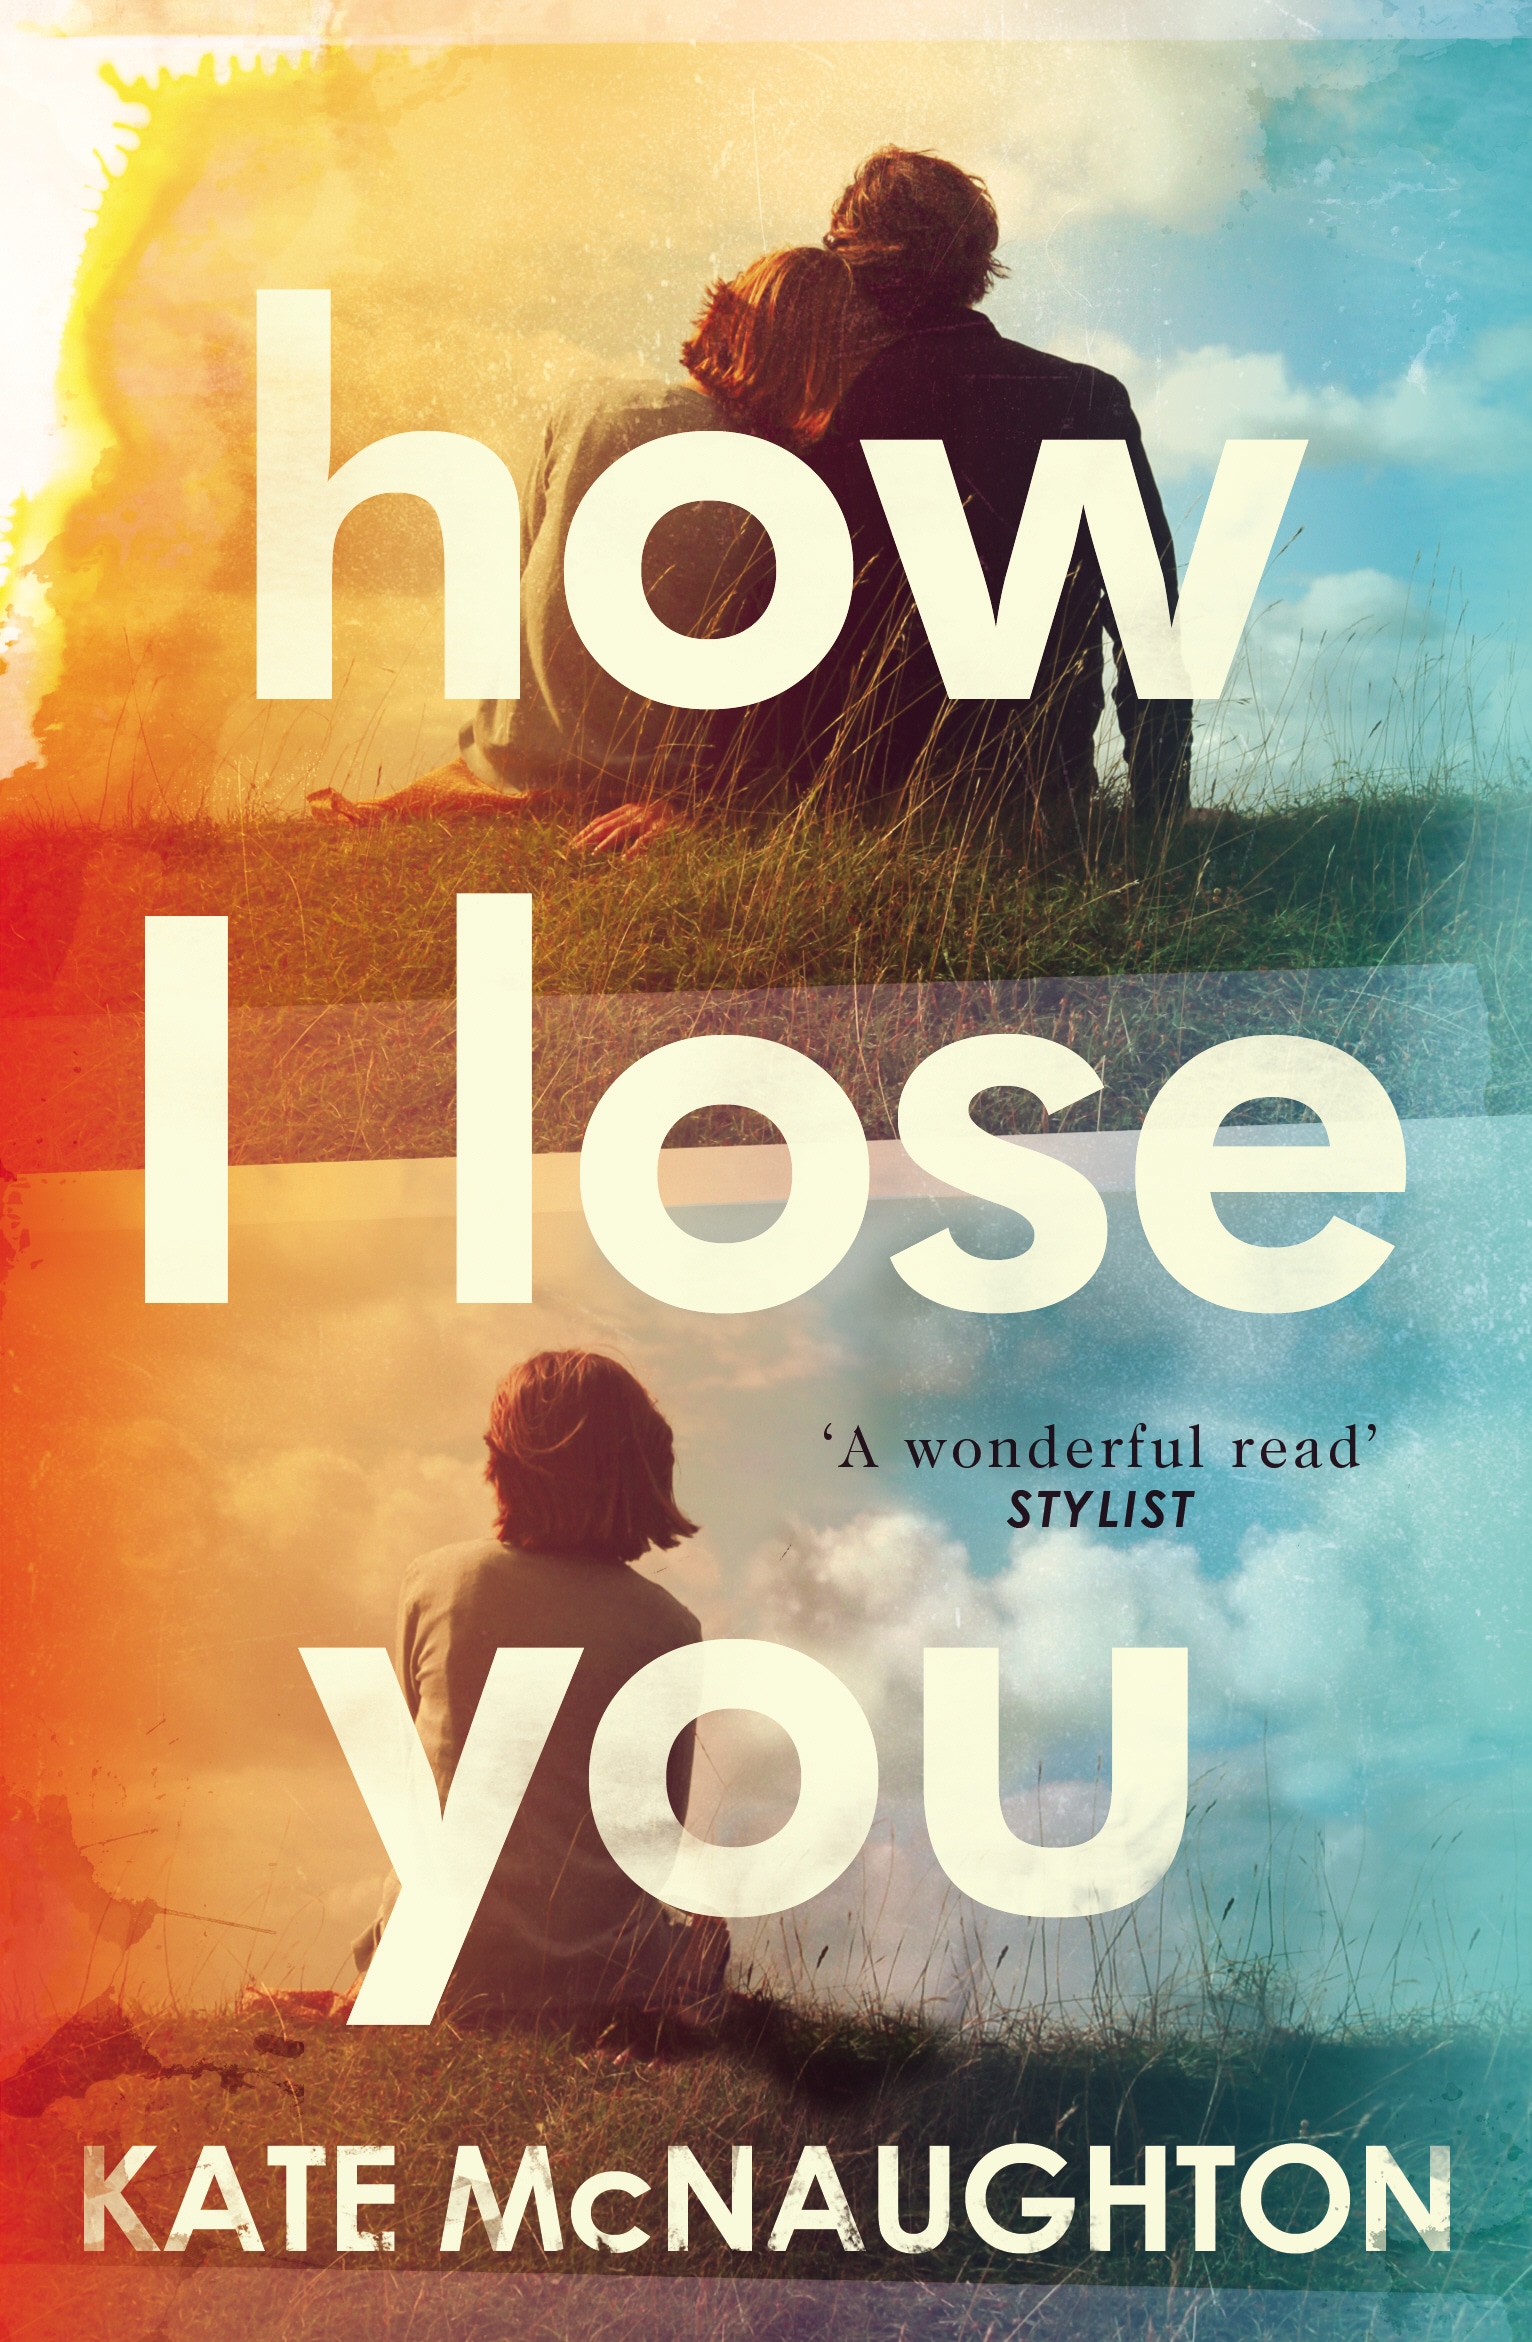 Book “How I Lose You” by Kate McNaughton — February 21, 2019